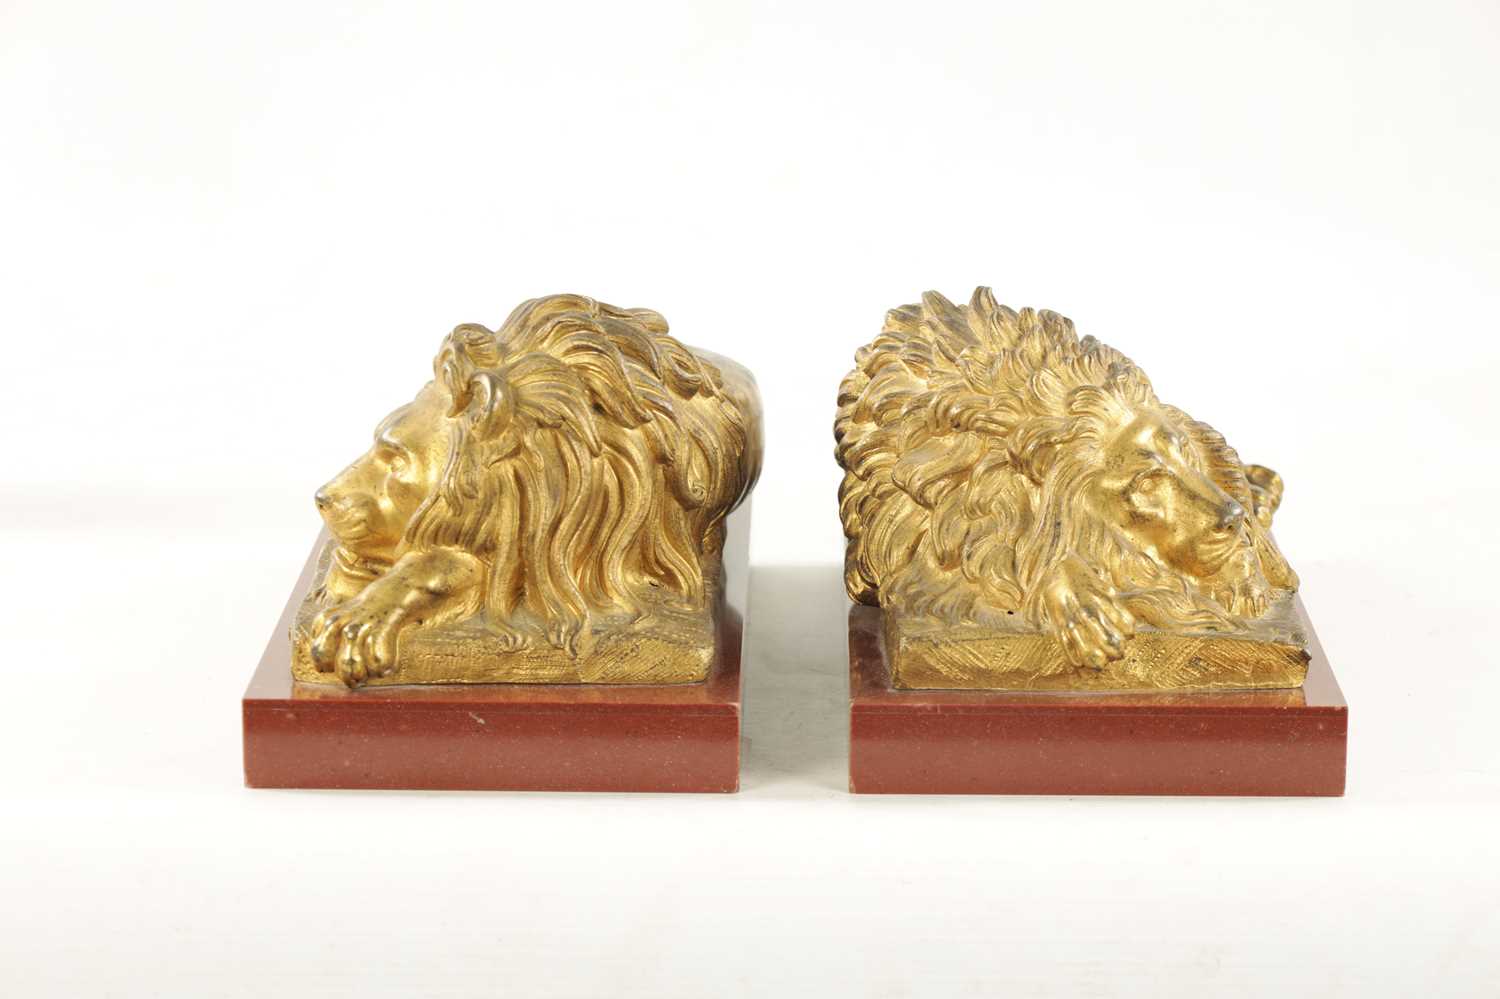 A PAIR OF LATE 19TH CENTURY GILT BRONZE RECUMBENT LIONS - Image 10 of 11